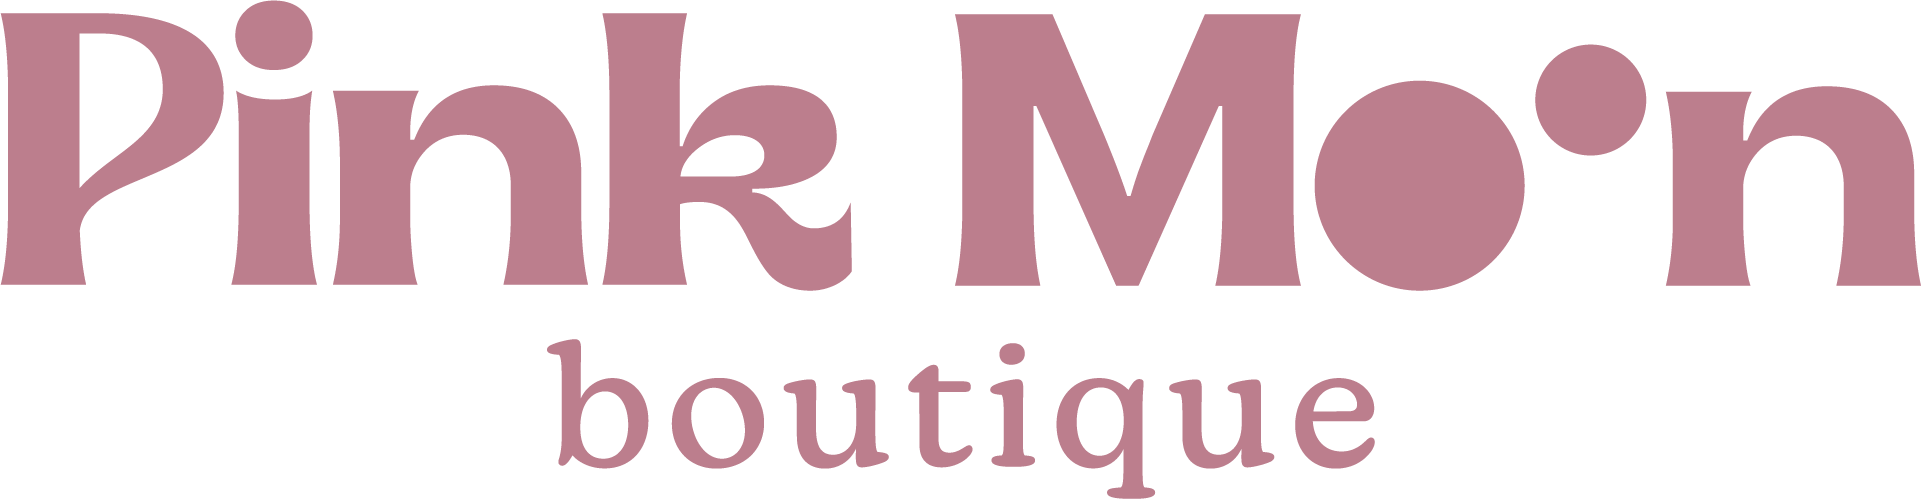 Pink Moon Boutique